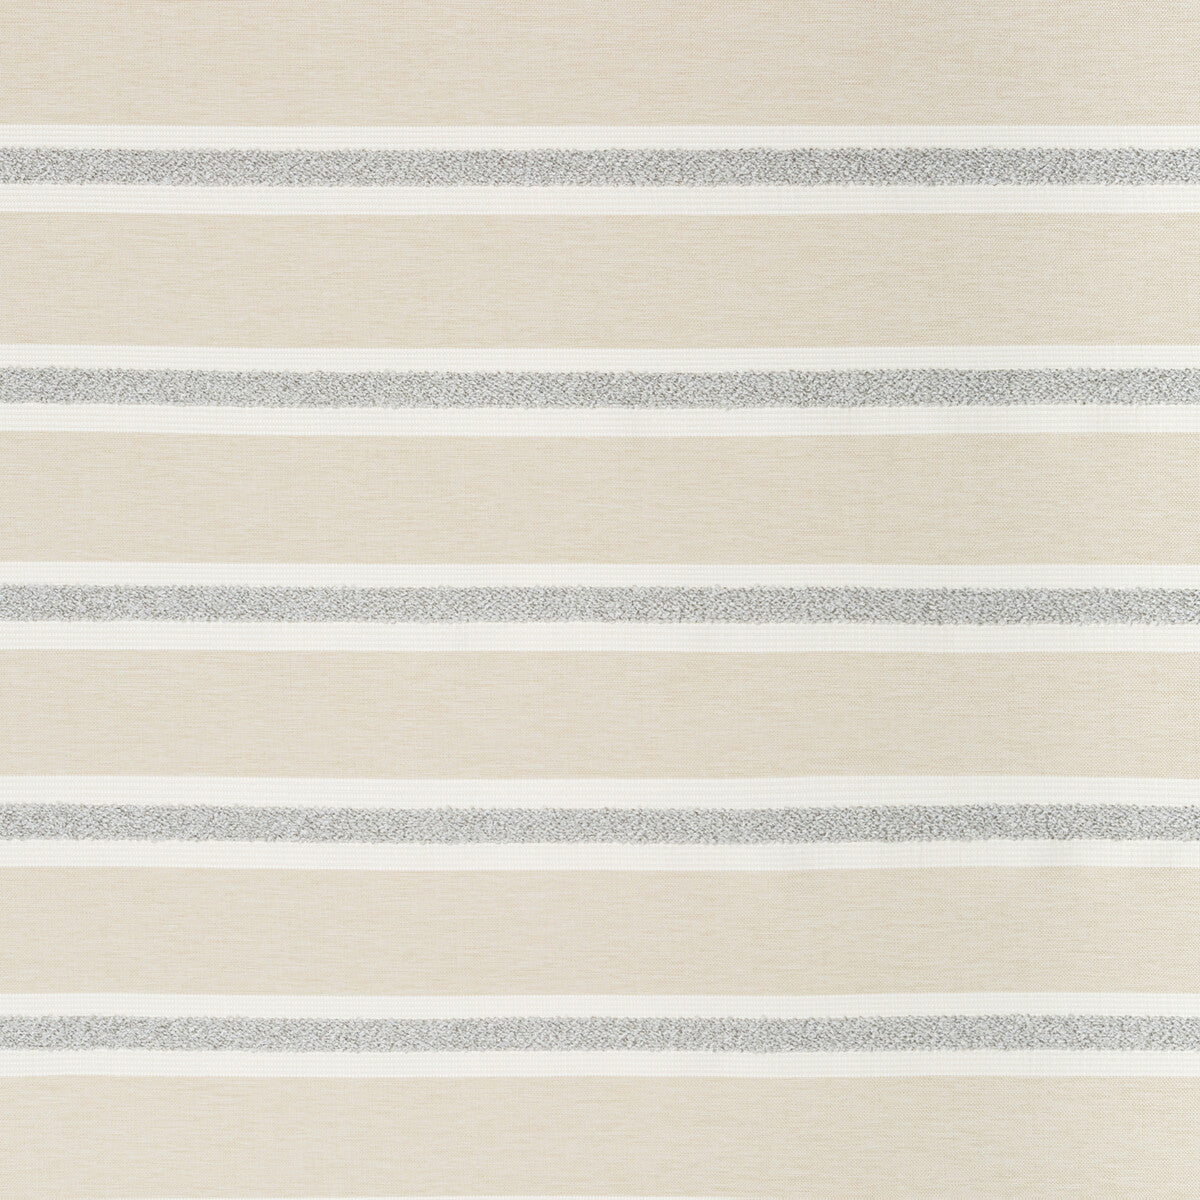 Know The Ropes fabric in platinum color - pattern 35539.1611.0 - by Kravet Couture in the Vista collection